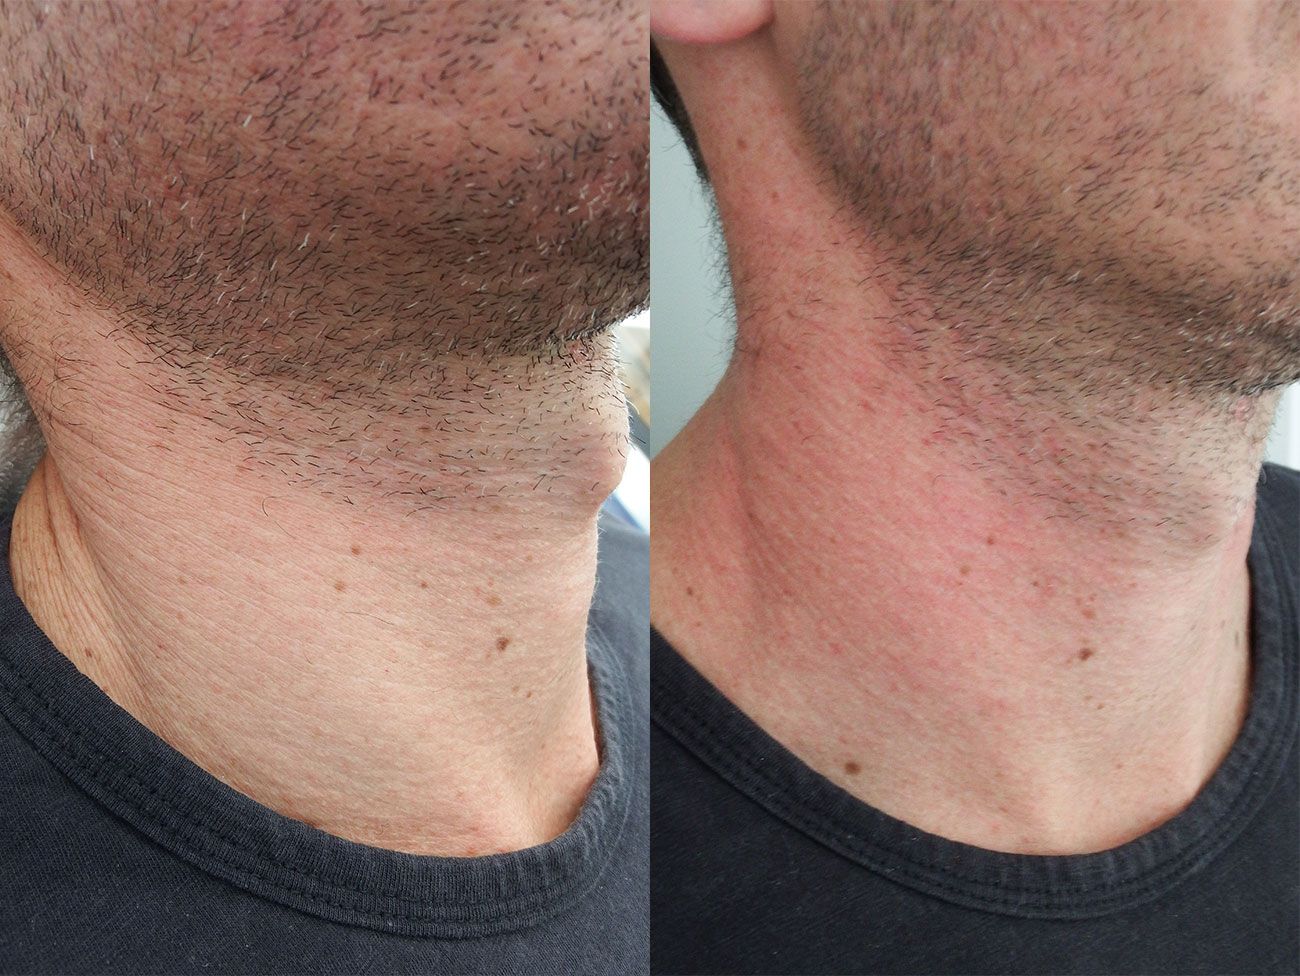 Significant improvement in texture of skin on neck using dermal filler